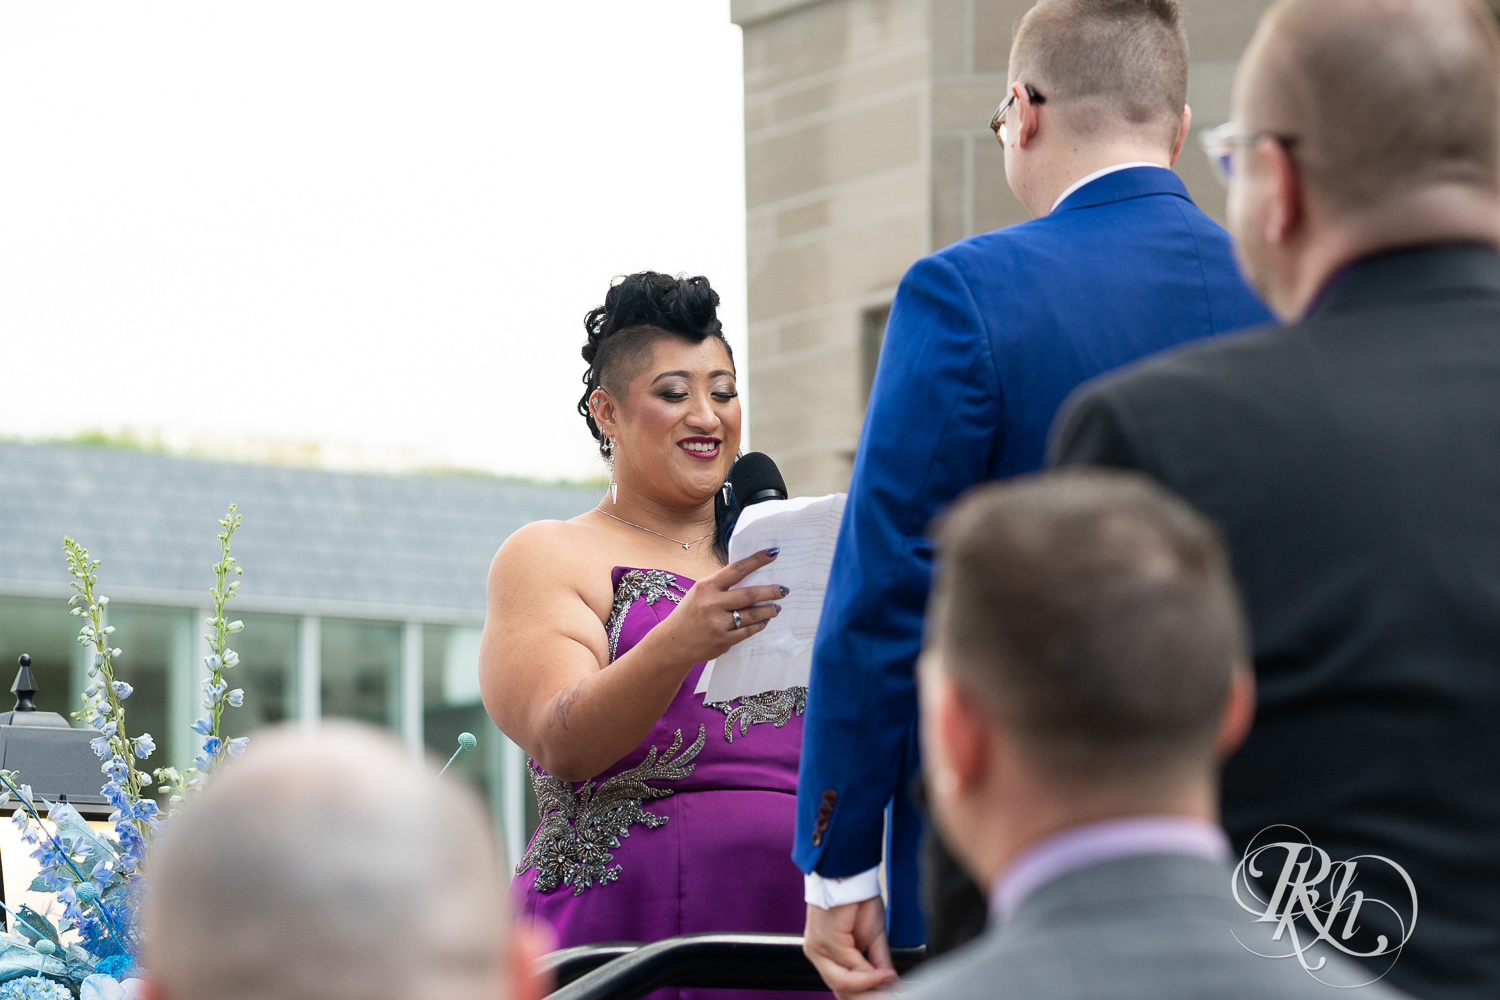 Filipino bride in purple wedding dress and groom read vows at wedding ceremony at the American Swedish Institute in Minneapolis, Minnesota.